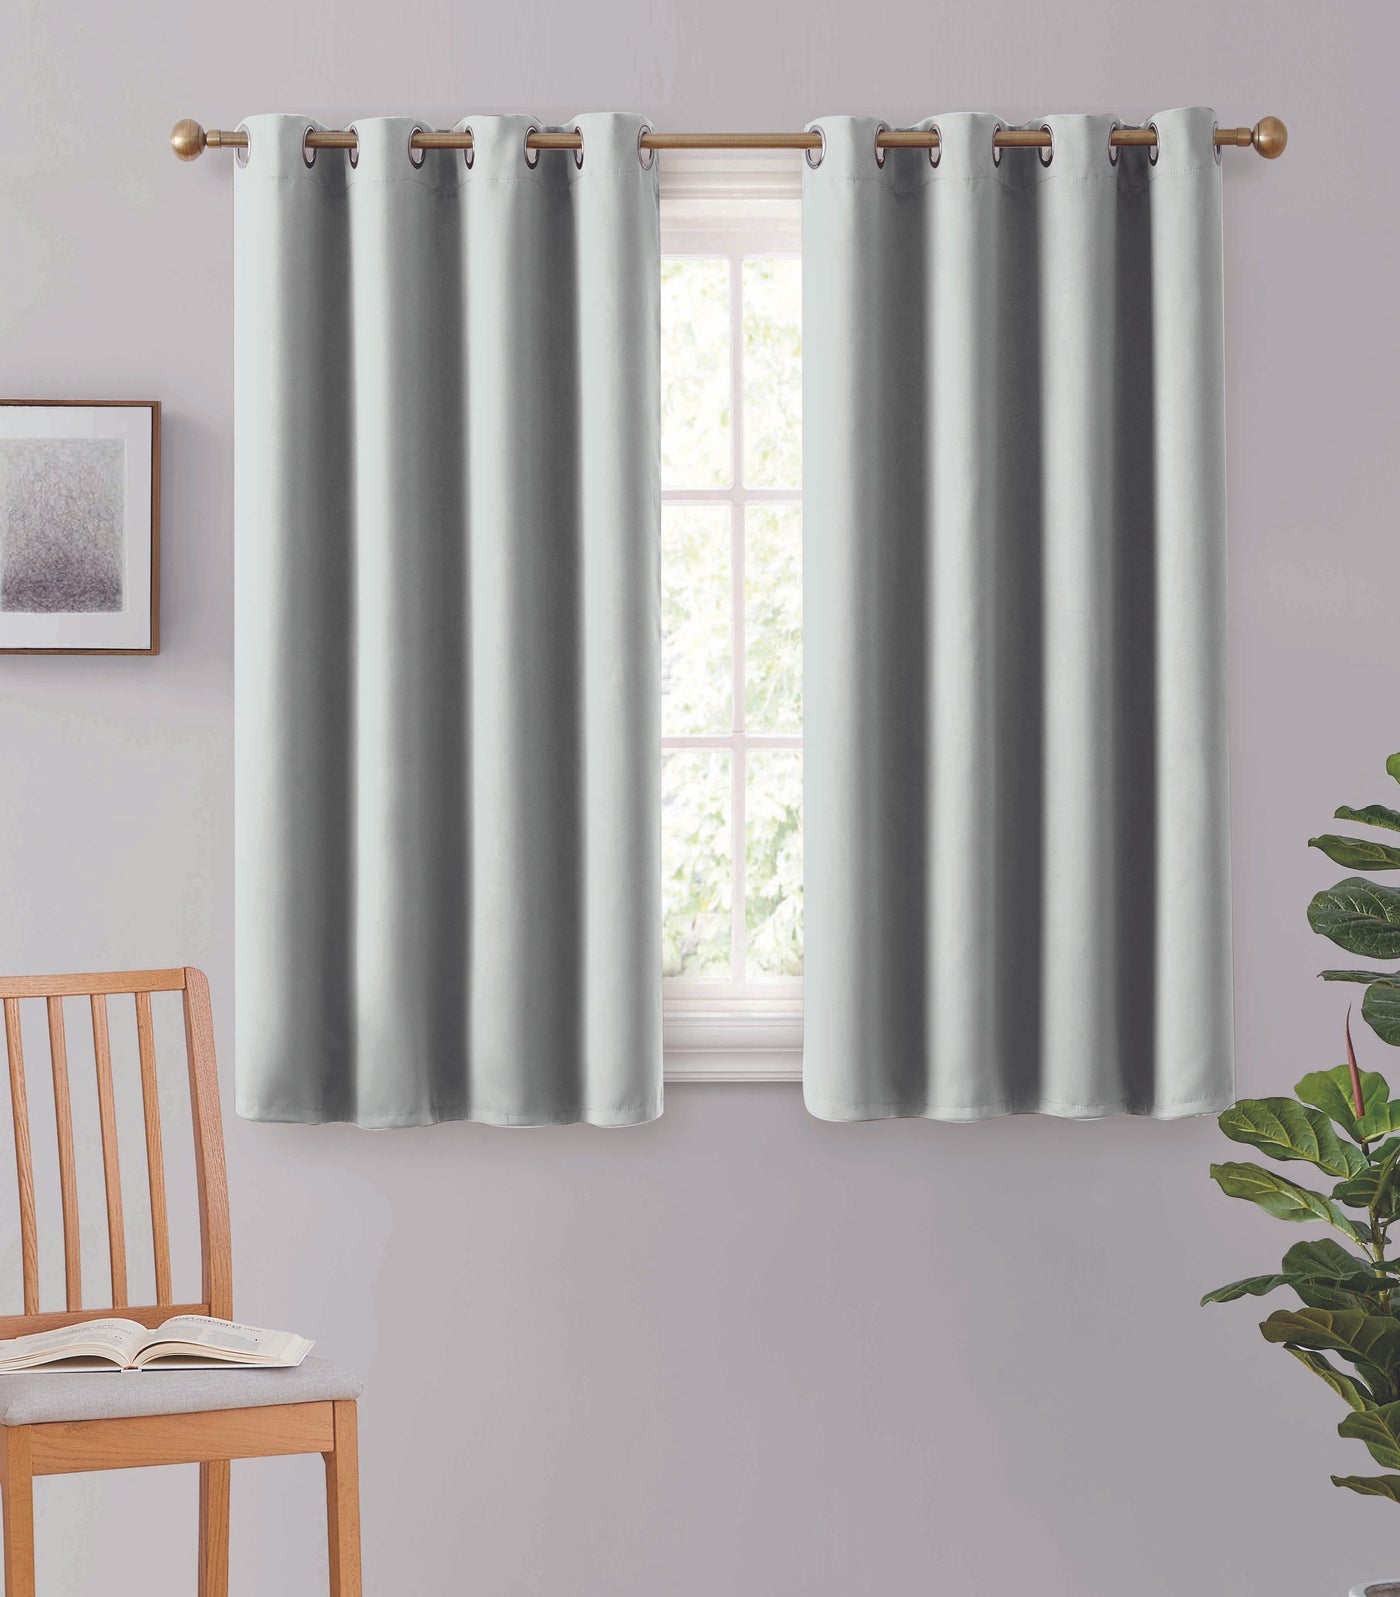 2pc Solid Grommet Thermal Insulated Window Curtain Panels Room Darkening Blackout 54" - Jenin-Home-Furnishing.CURTAINS